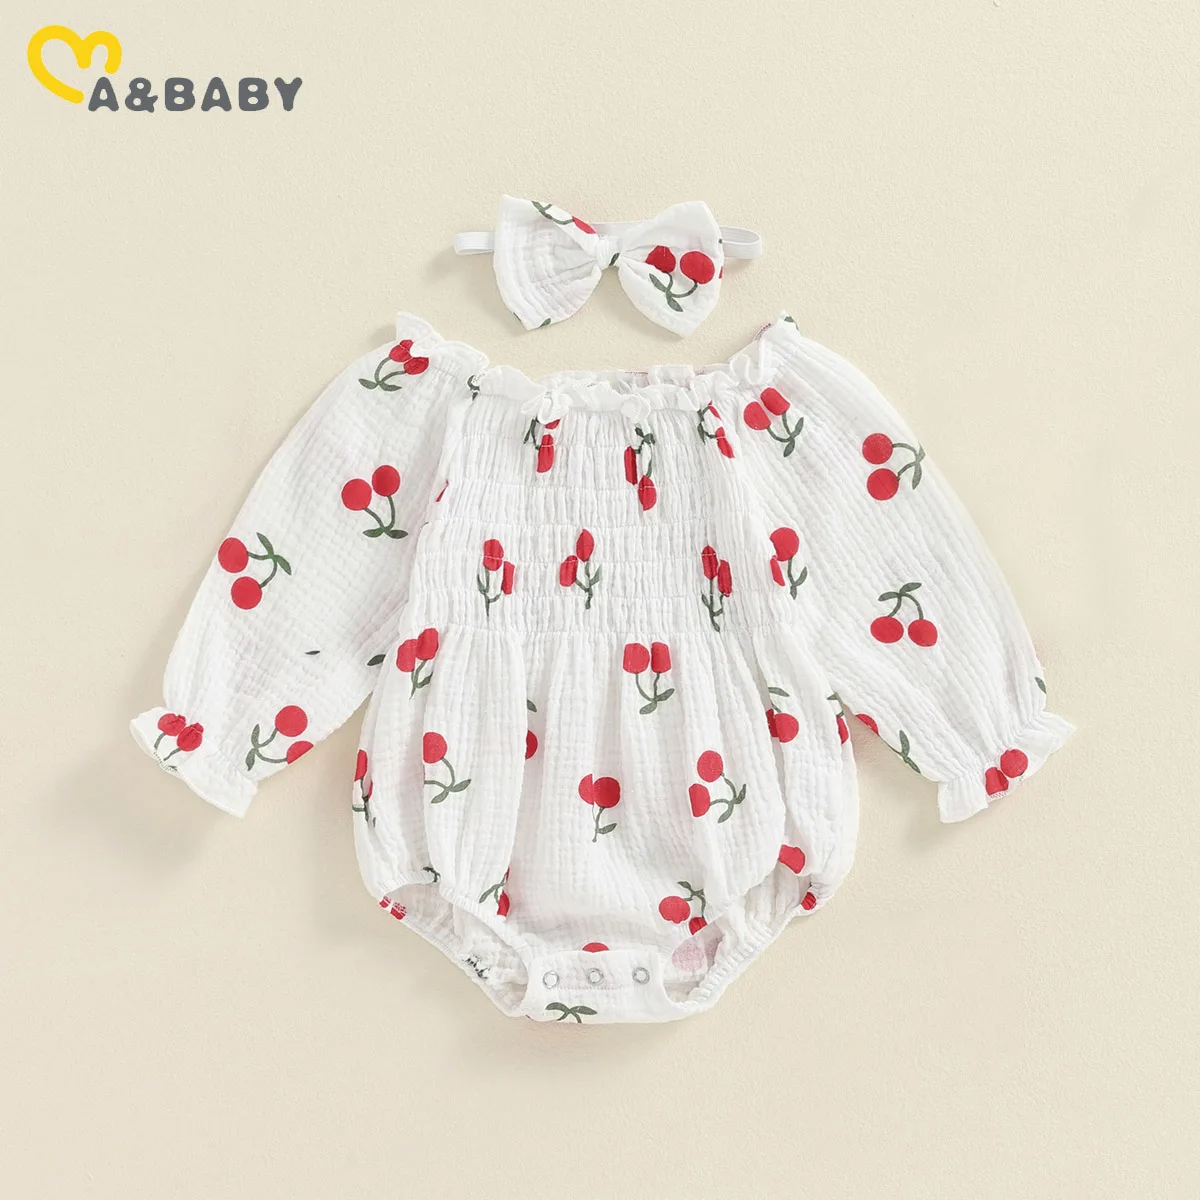 

ma&baby 0-18M Baby Girl Romper Newborn Infant Toddler Girl Cherry Print Jumpsuit Long Sleeve Clothes Headband Fall Spring Outfit